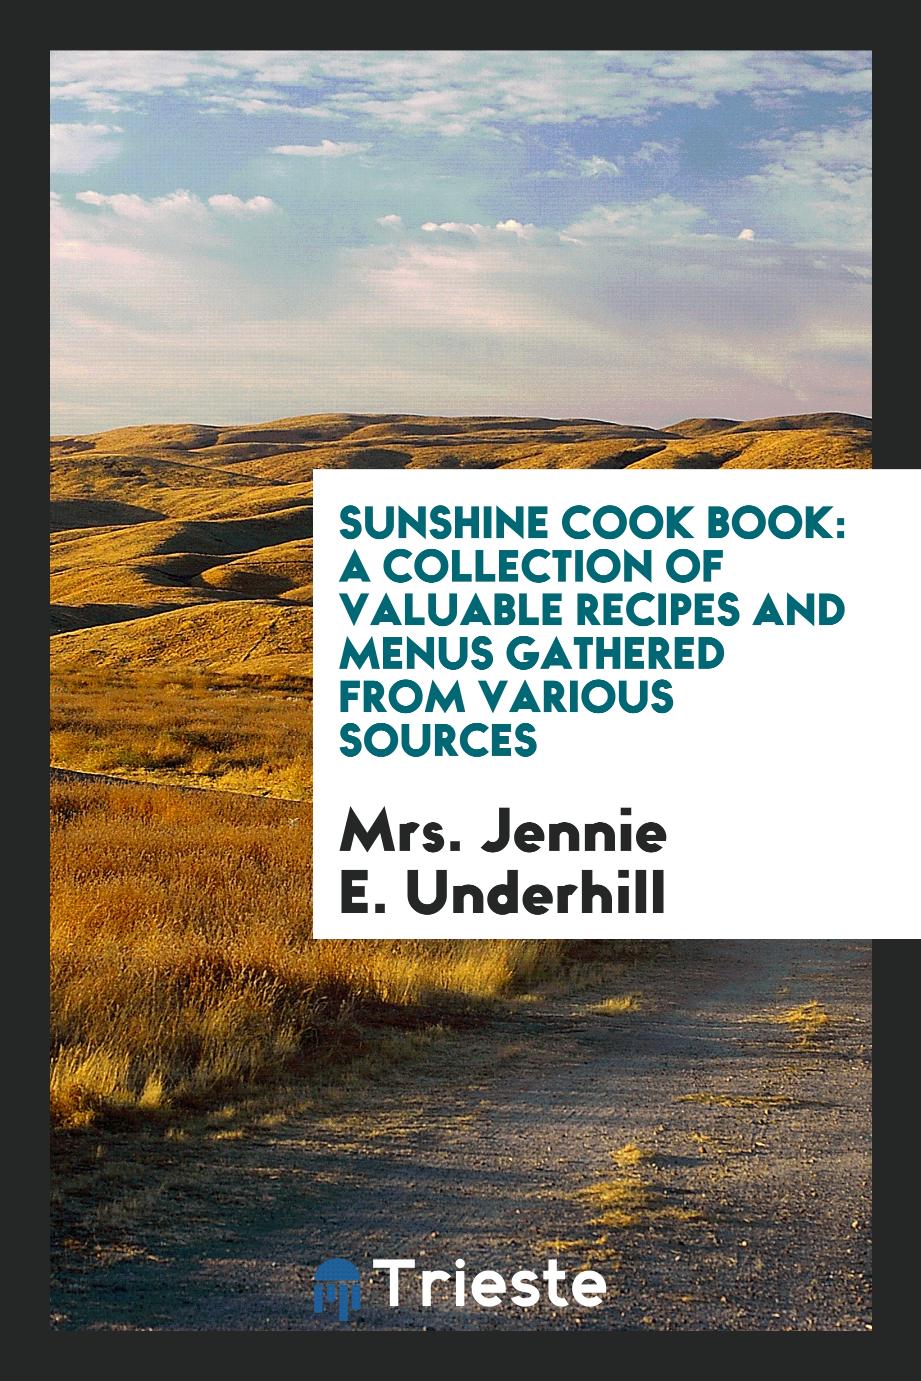 Sunshine Cook Book: A Collection of Valuable Recipes and Menus Gathered from Various Sources